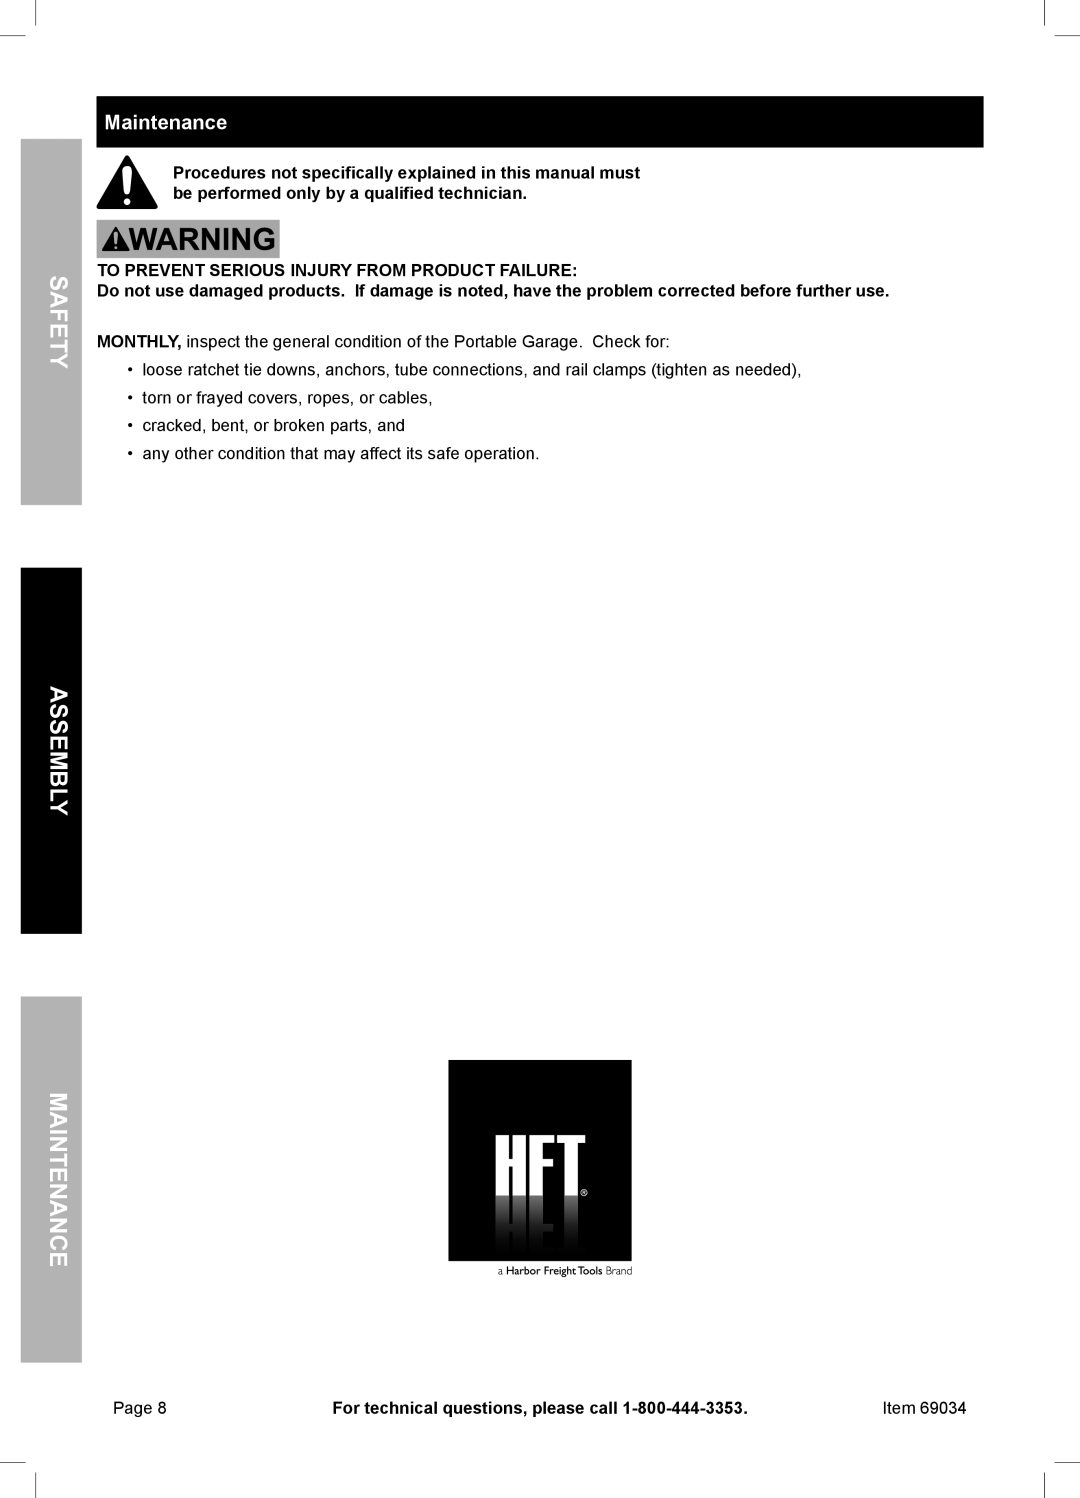 Harbor Freight Tools 69034 owner manual To Prevent Serious Injury From Product Failure, Safety Assembly Maintenance 